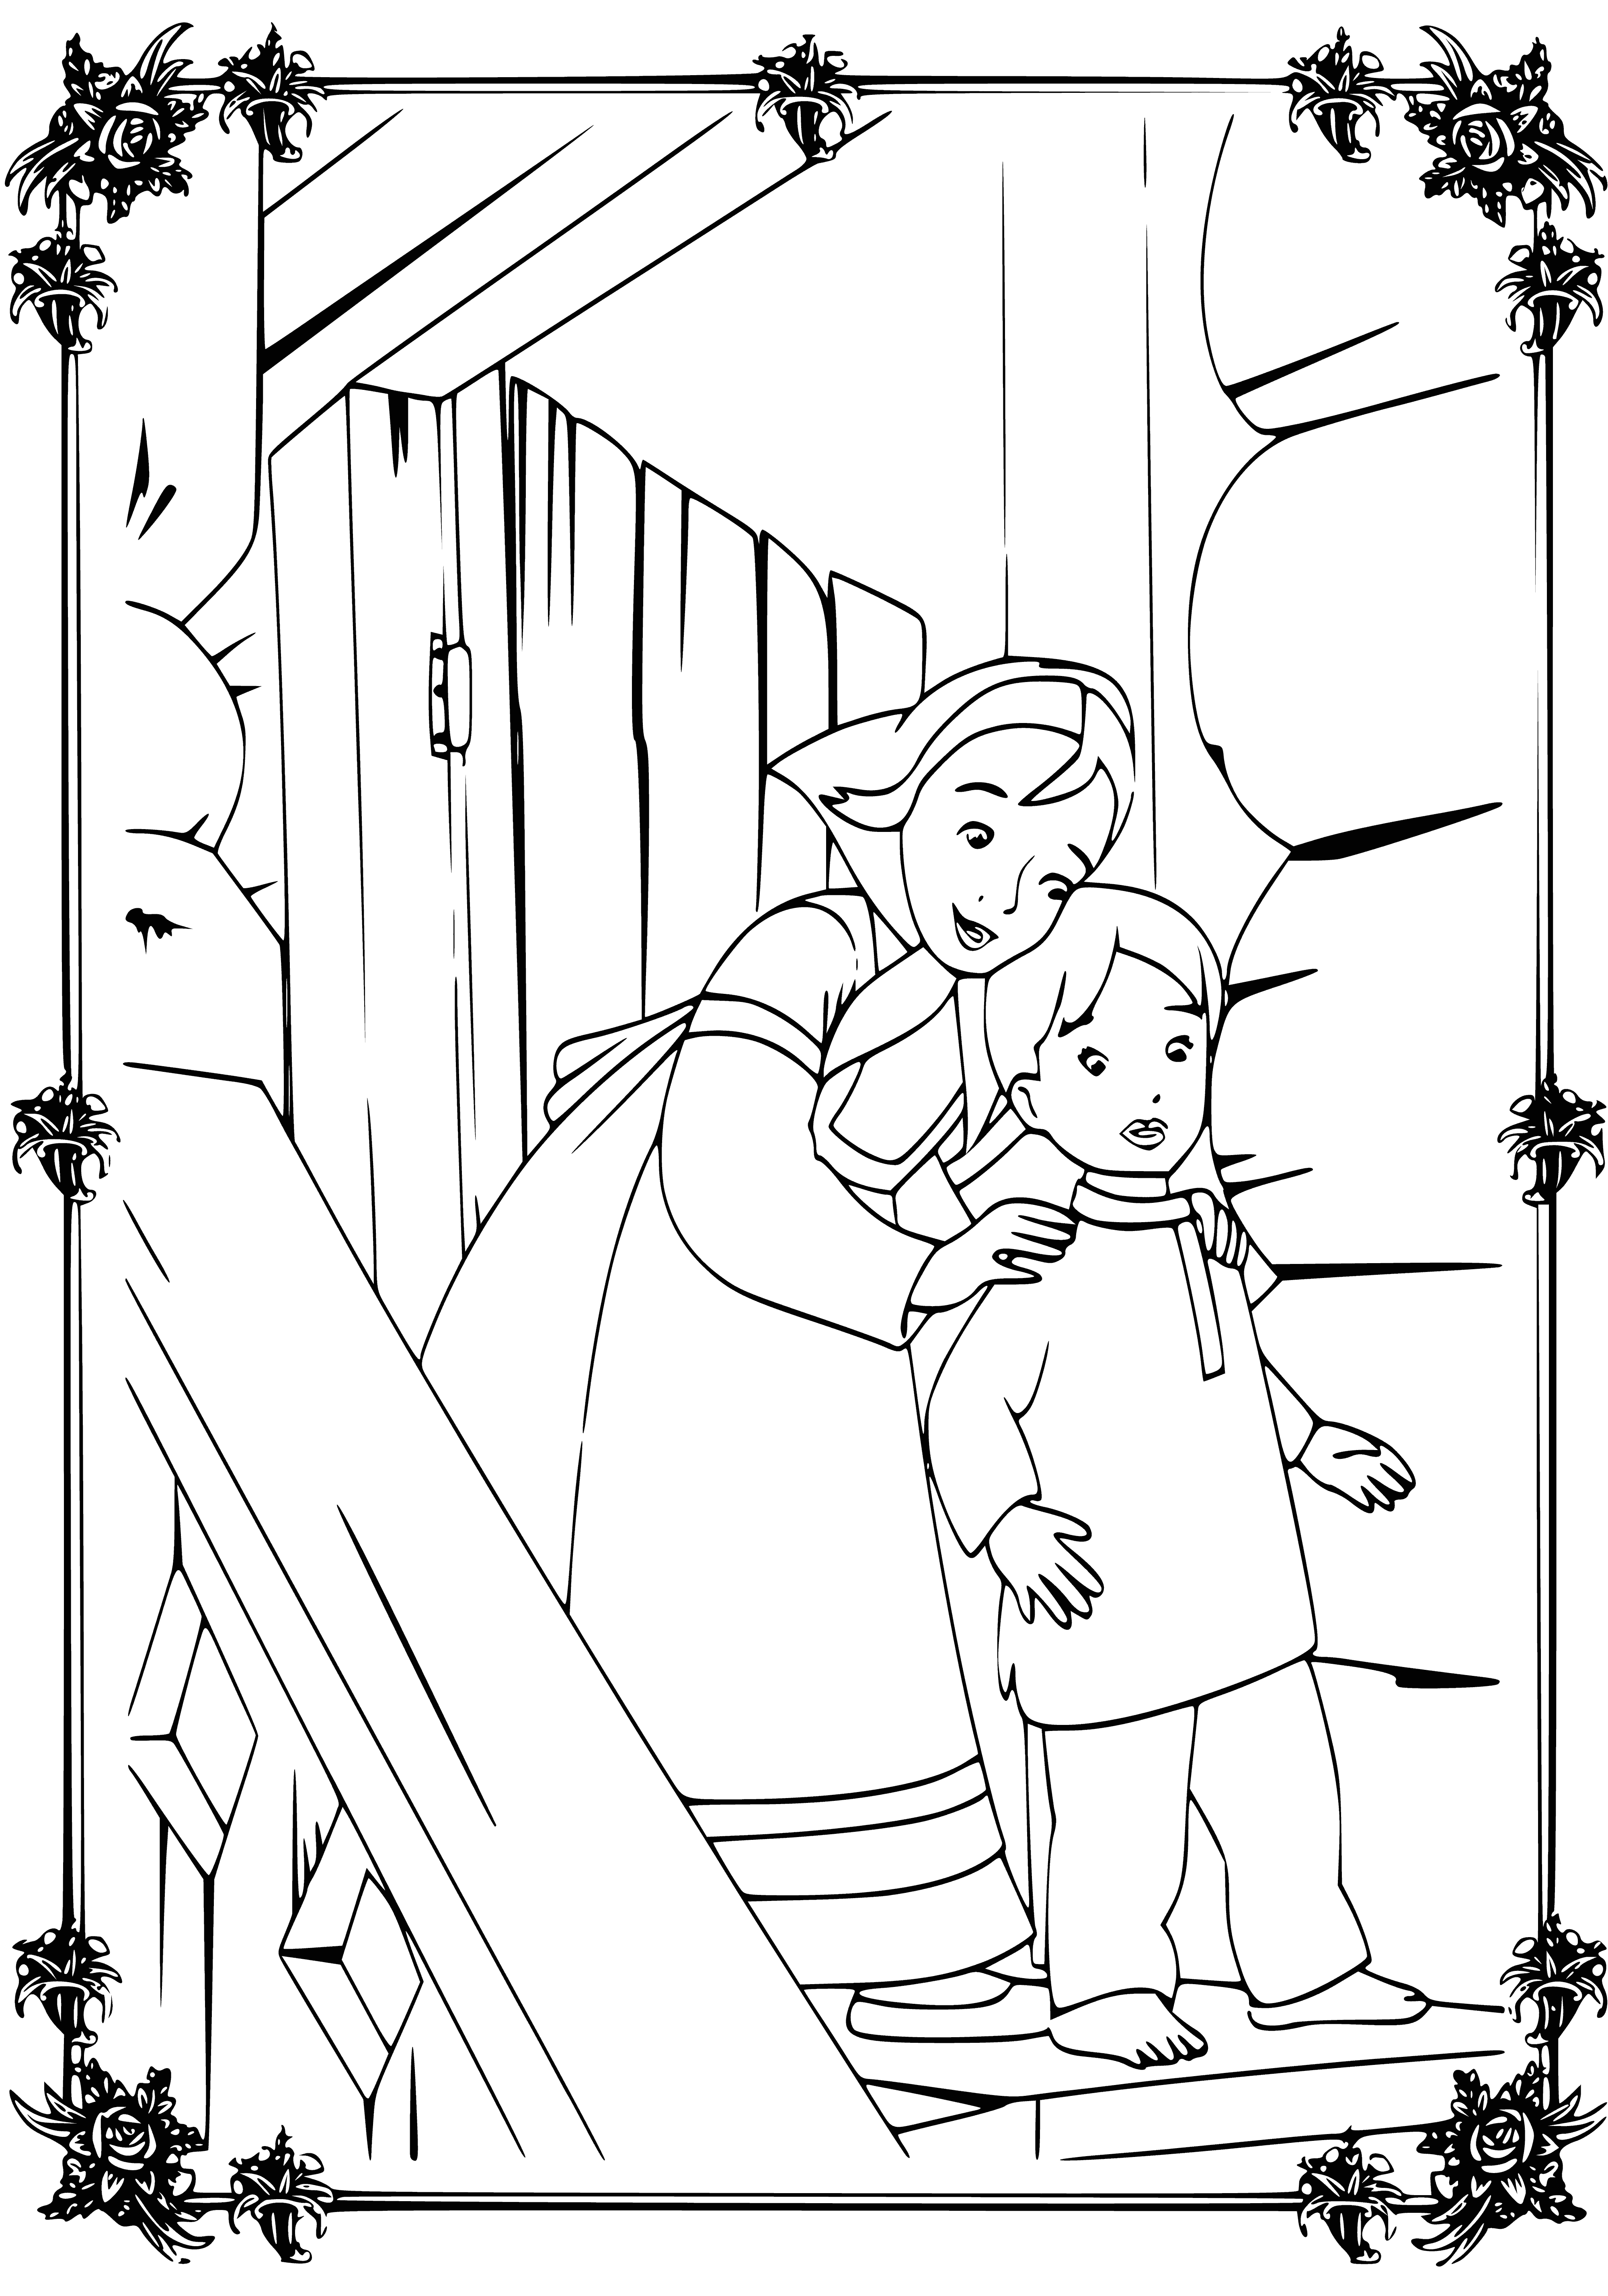 Brother and sister coloring page